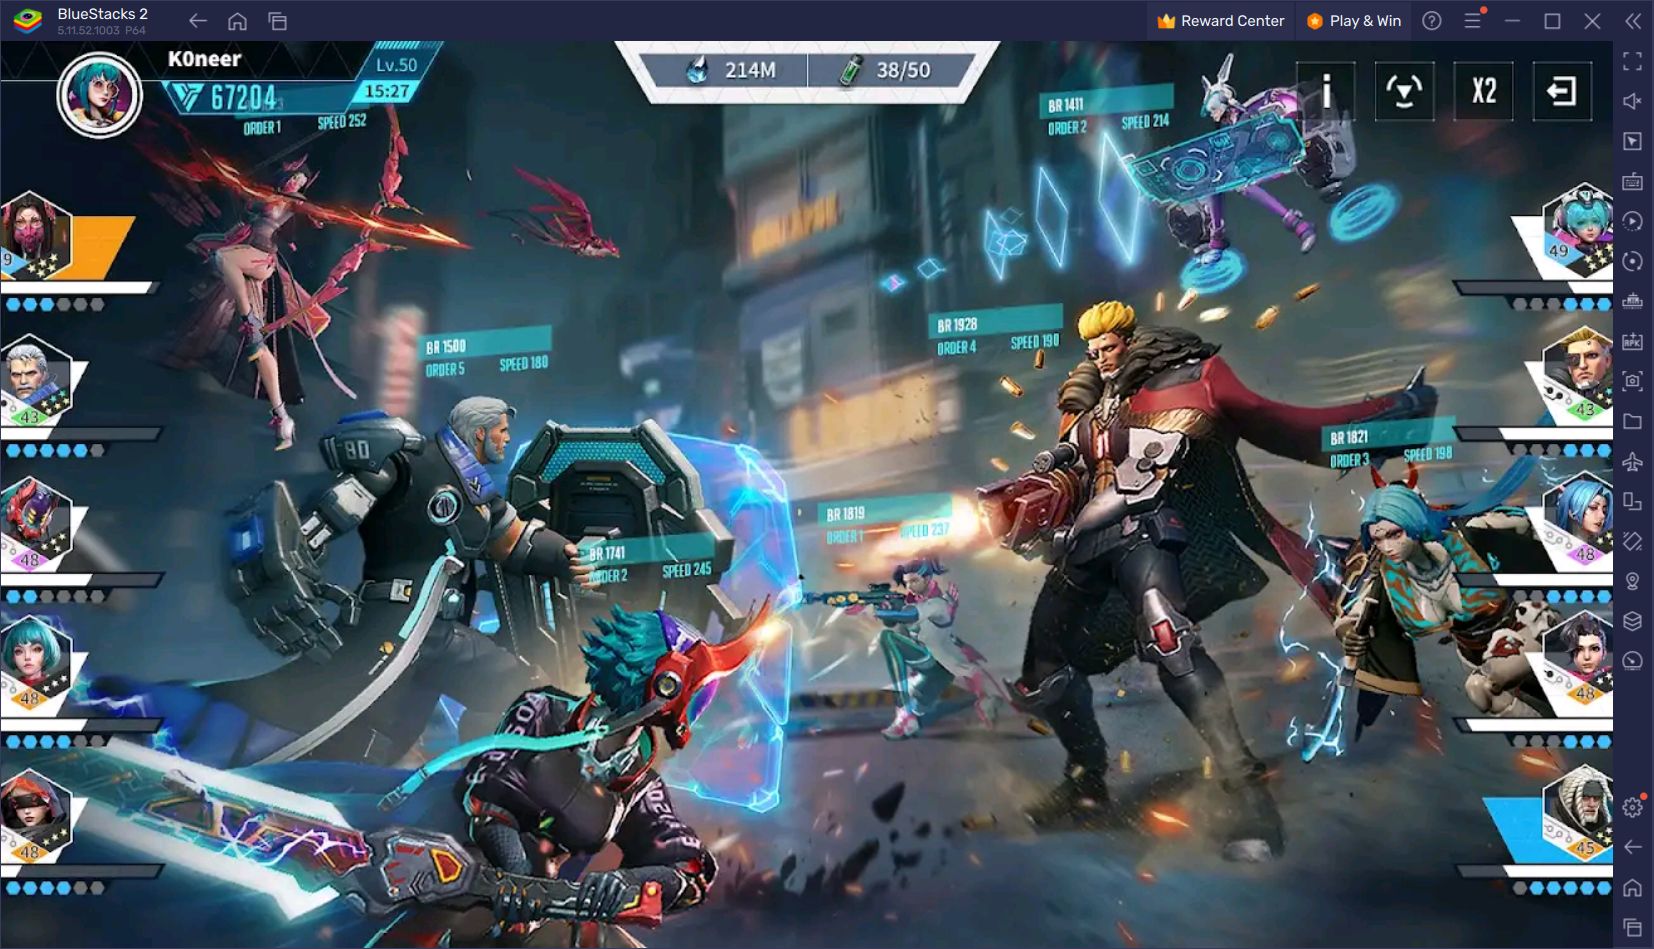 Use BlueStacks to Play Rise of Cyber on PC